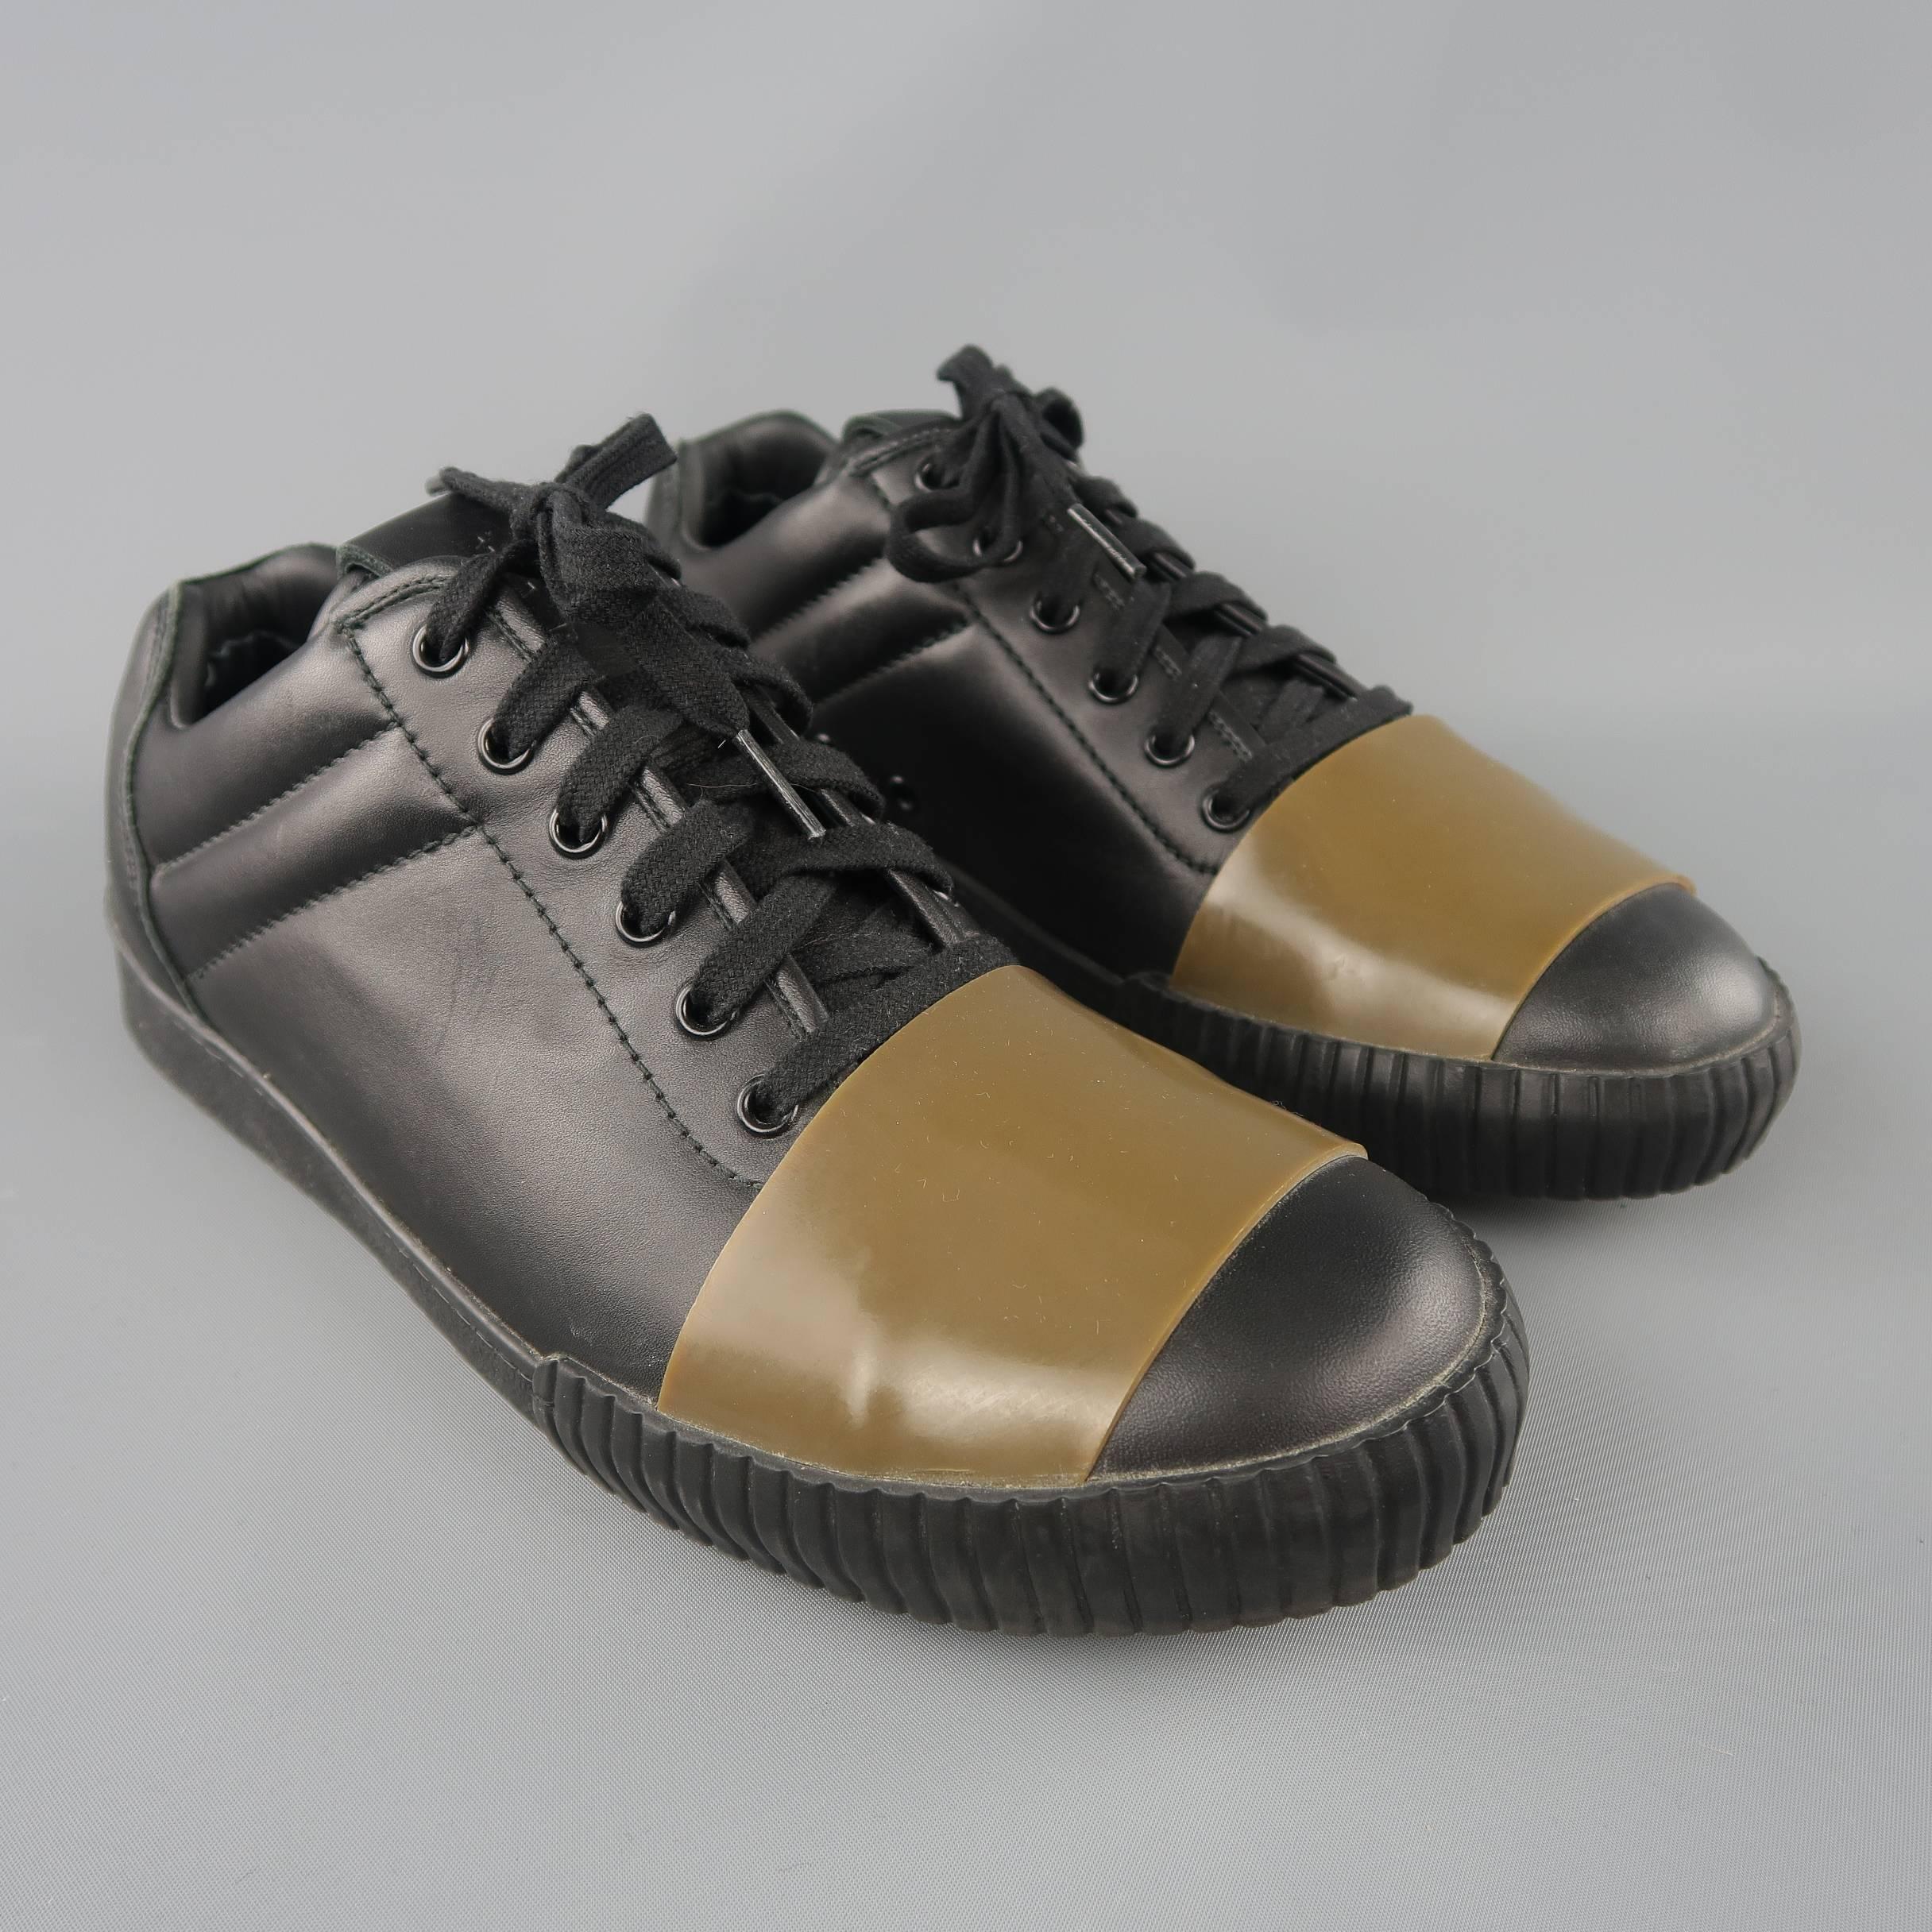 MARNI low top sneakers come in smooth black leather with quilted sides, thick rubber sole with woven bottom, and olive green rubber strap detail. Made in Italy.
 
Excellent Pre-Owned Condition.
Marked: IT 43
 
Outsole: 11.5 x 4 in.
